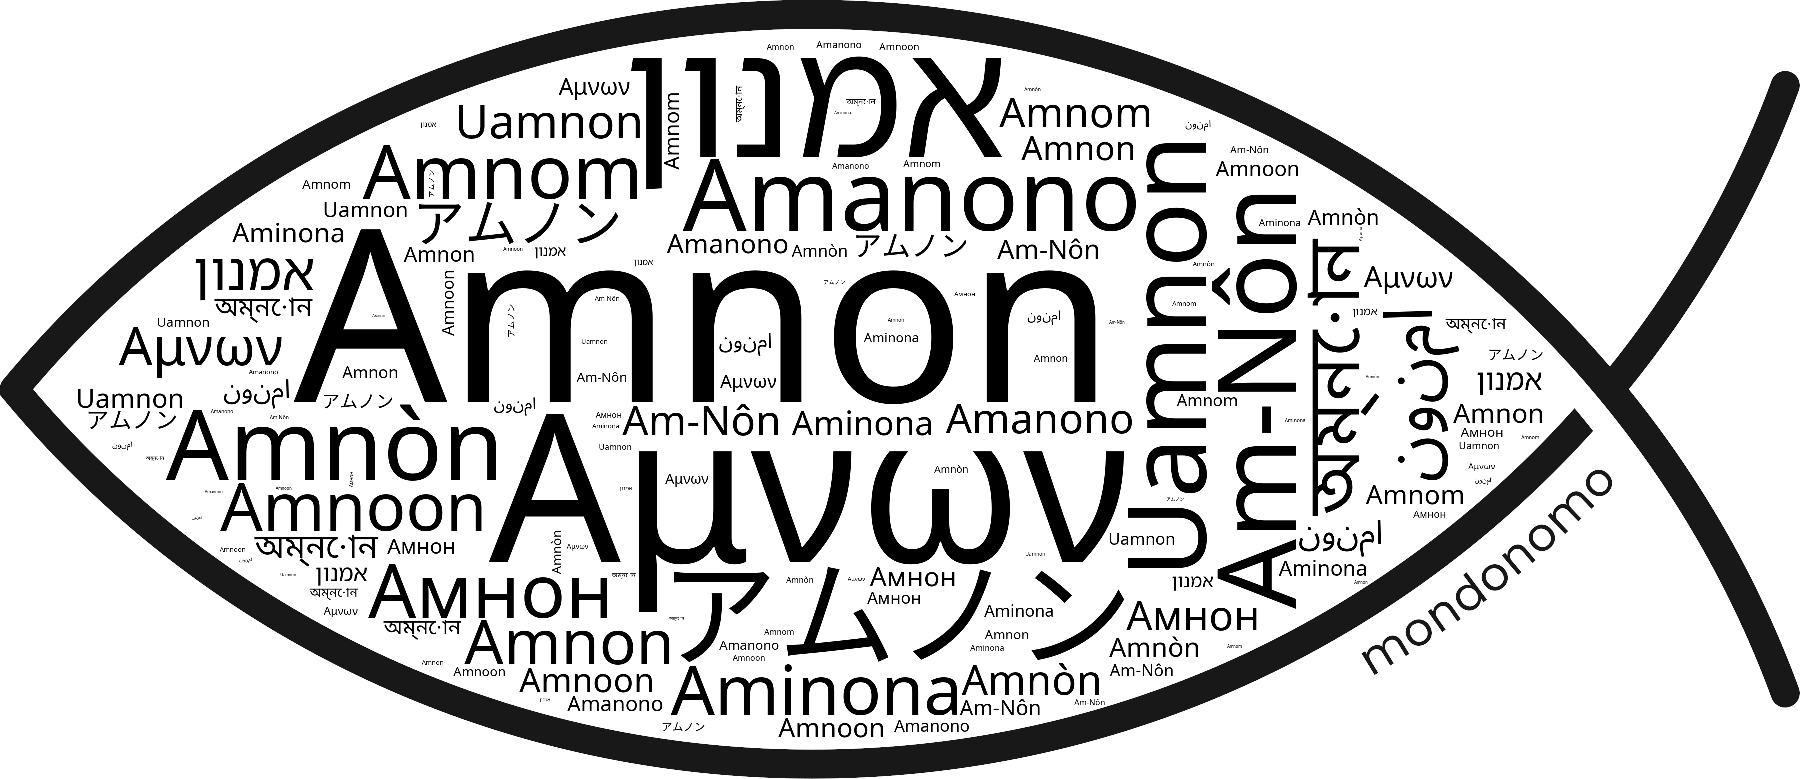 Name Amnon in the world's Bibles